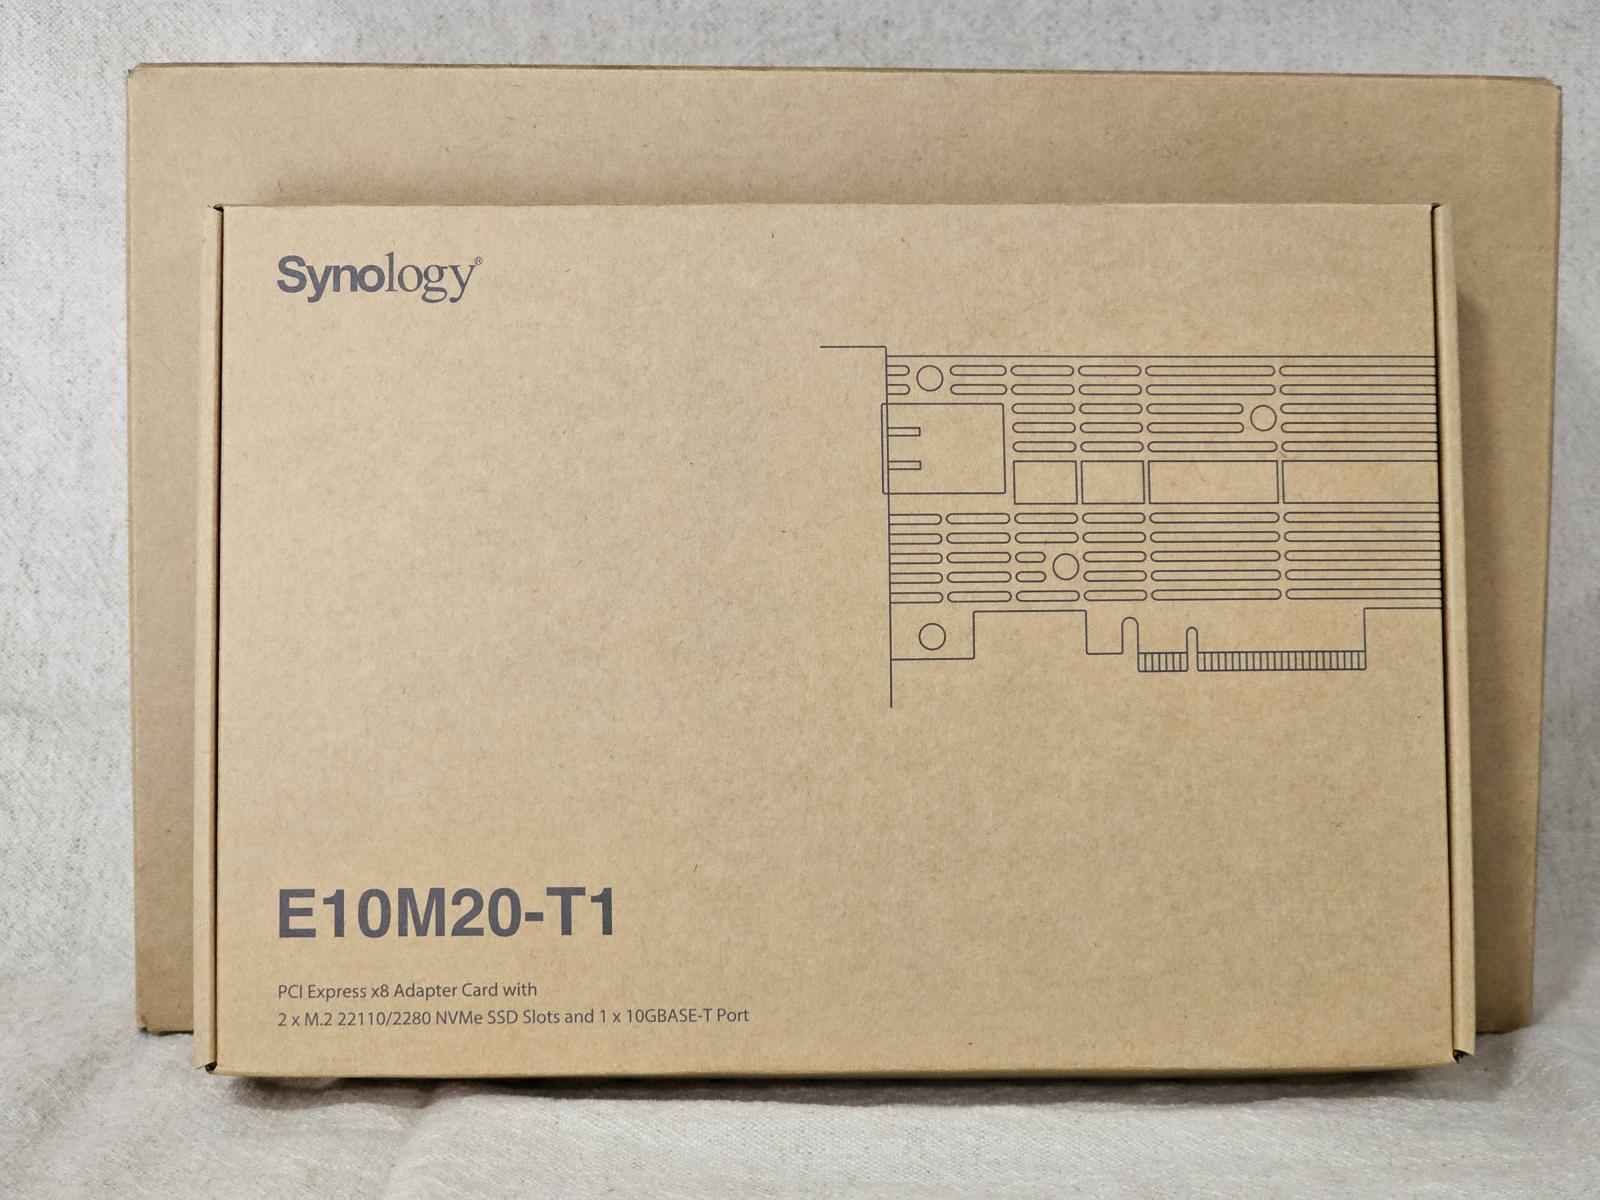 For sale Synology E10M20-T1 10GbE and dual M2 NVMe add-in card